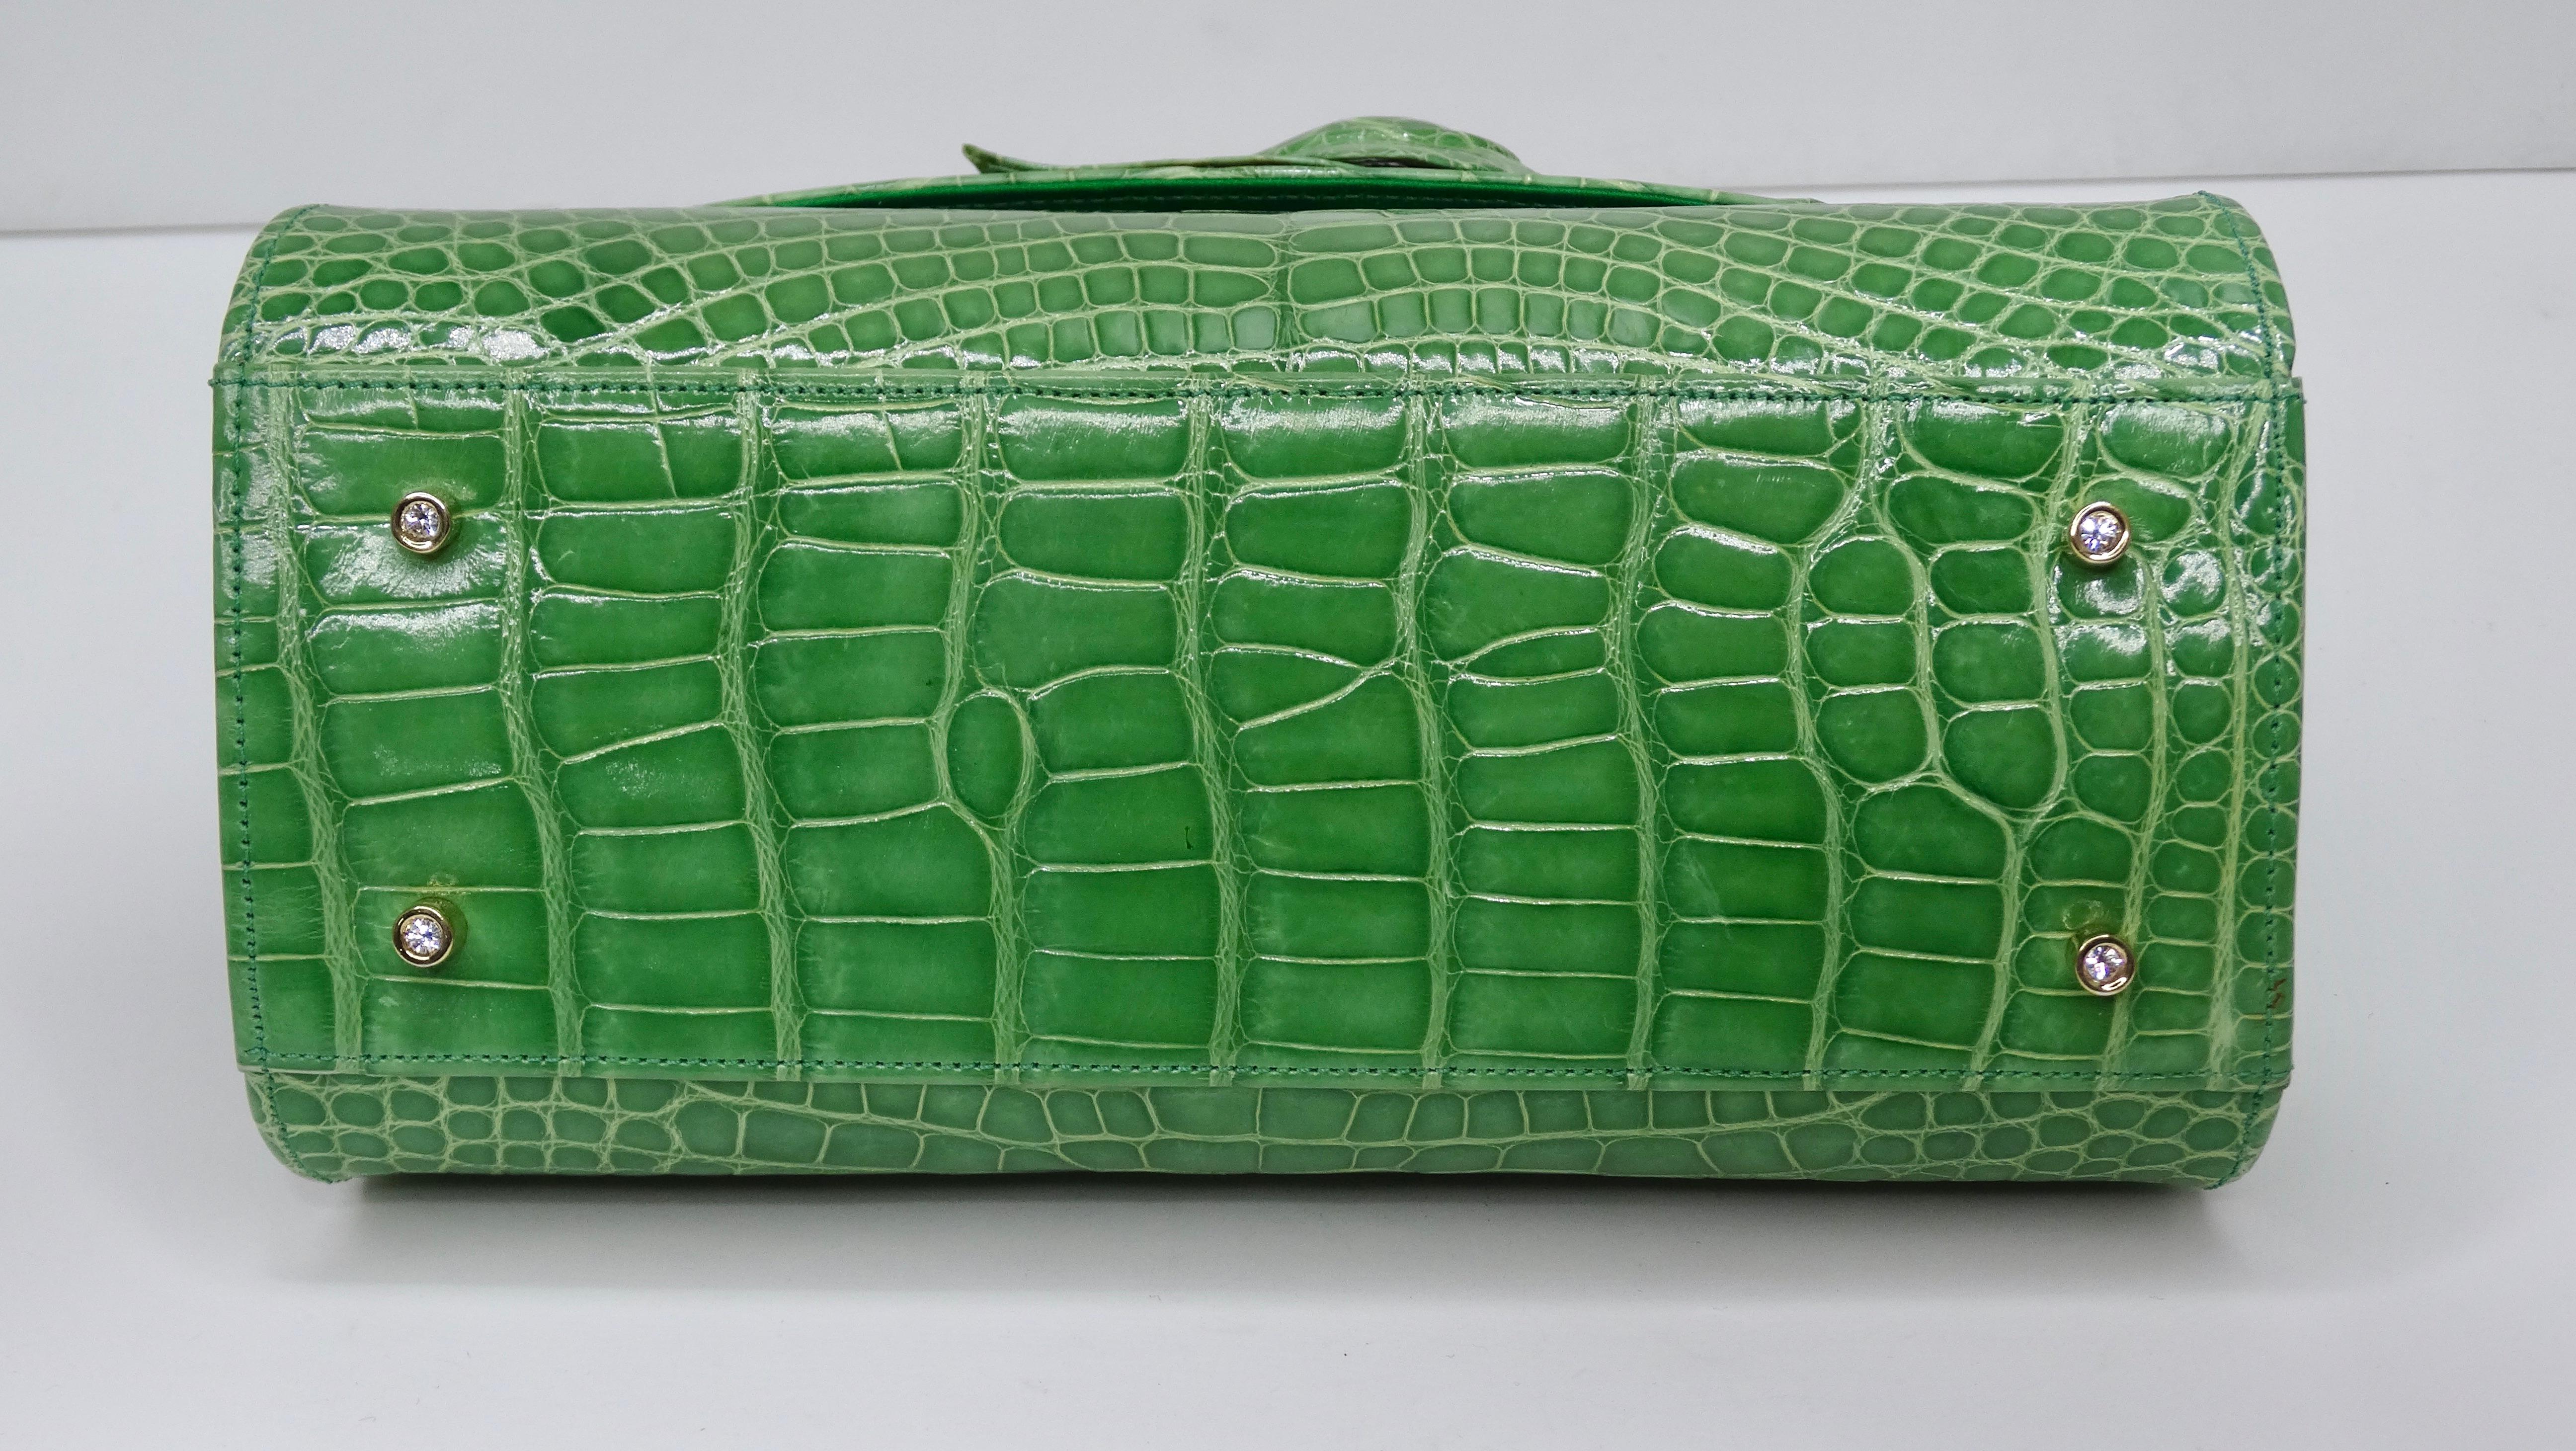 Judith Leiber Green Alligator Top Handle Evening Bag In Excellent Condition For Sale In Scottsdale, AZ